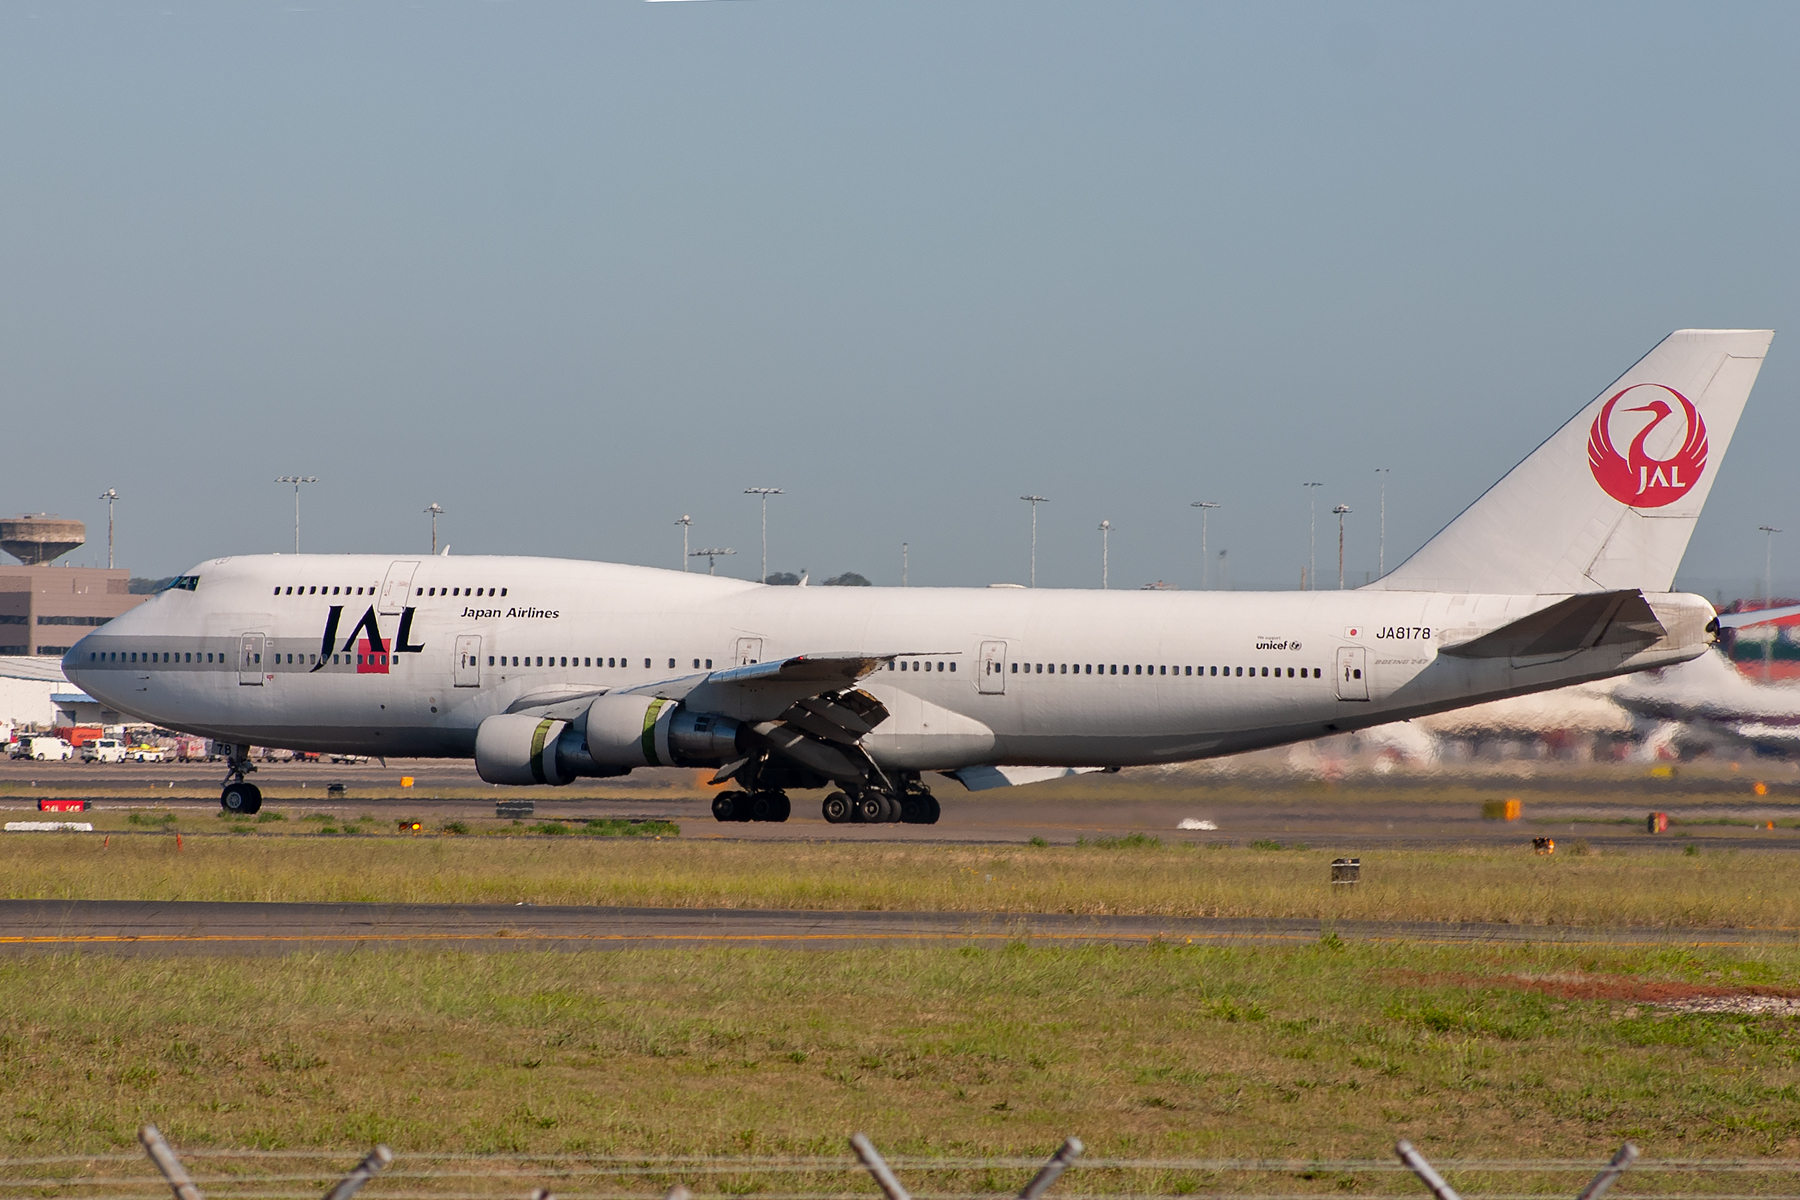 Japan Airlines Boeing 747-300 JA8178 at Kingsford Smith